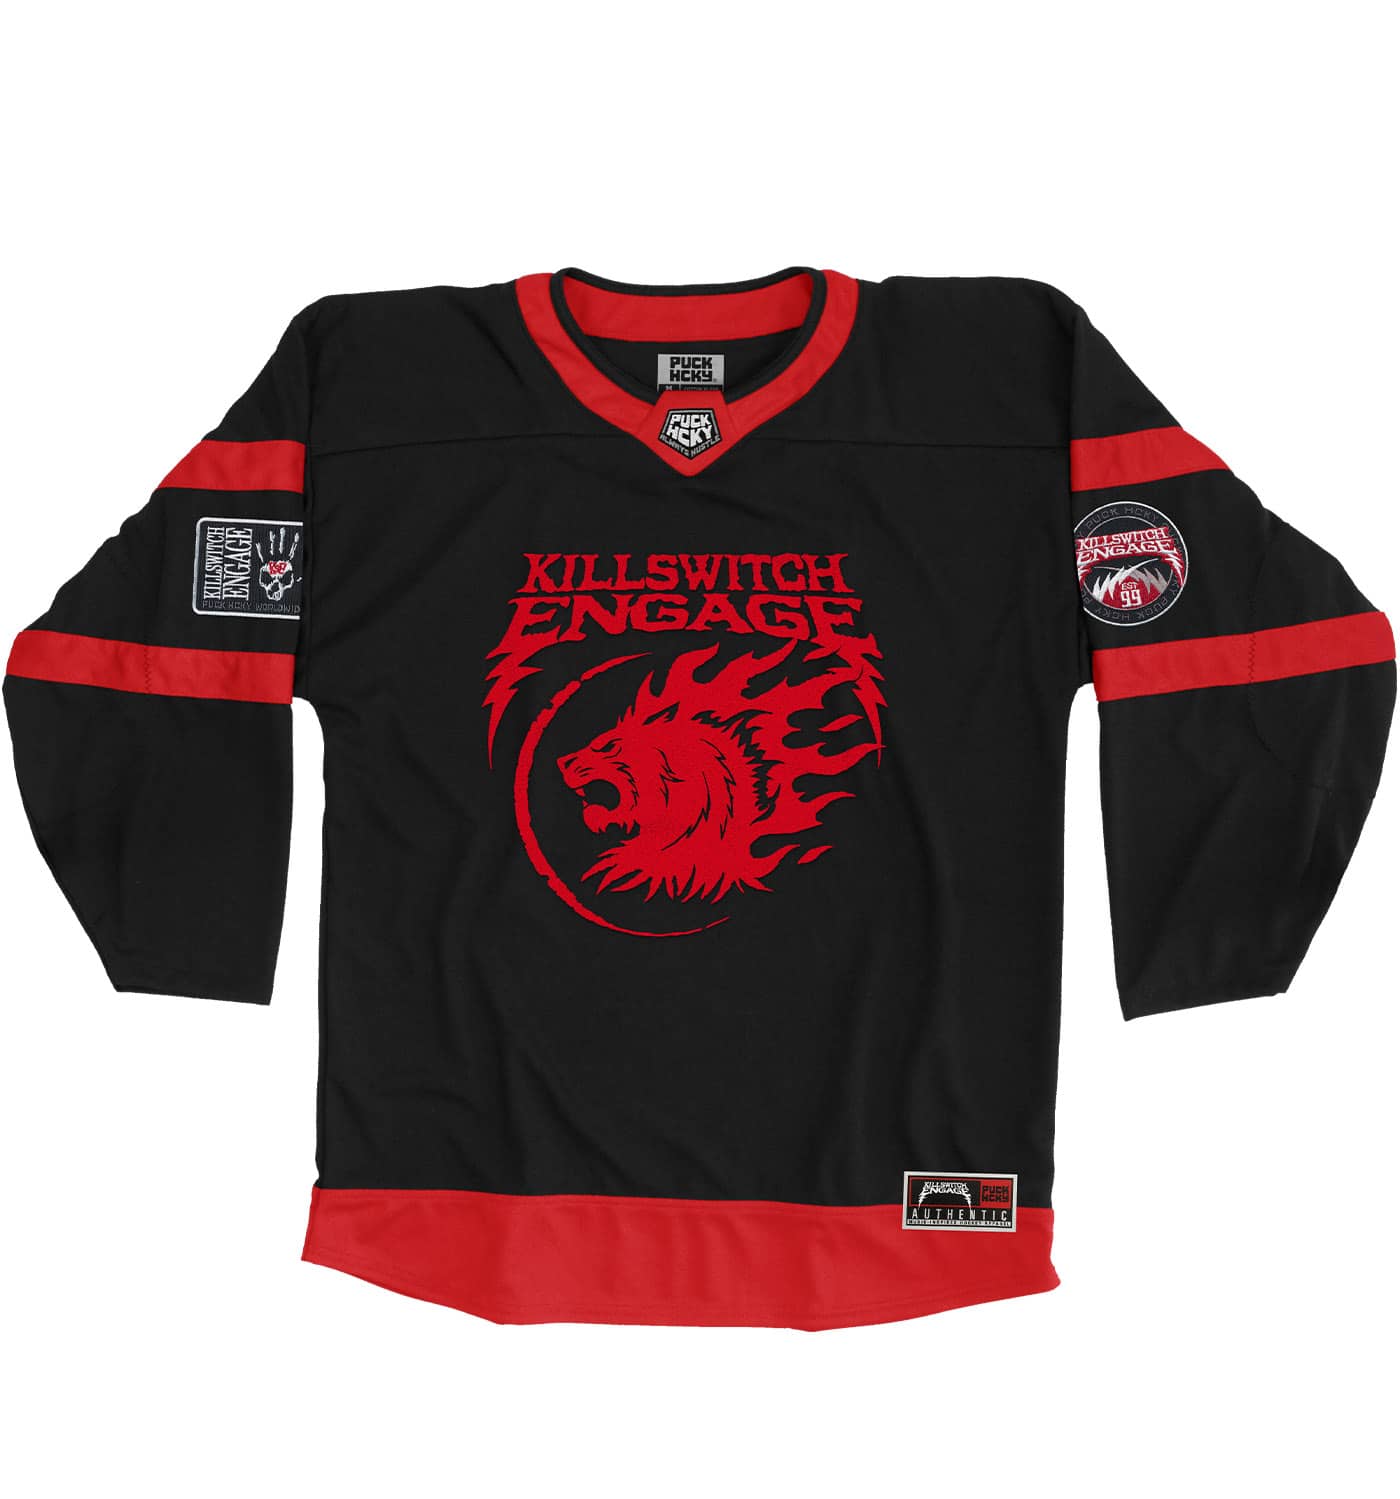 KILLSWITCH ENGAGE 'SKATE BY DESIGN' HOCKEY hockey jersey in black and red front view